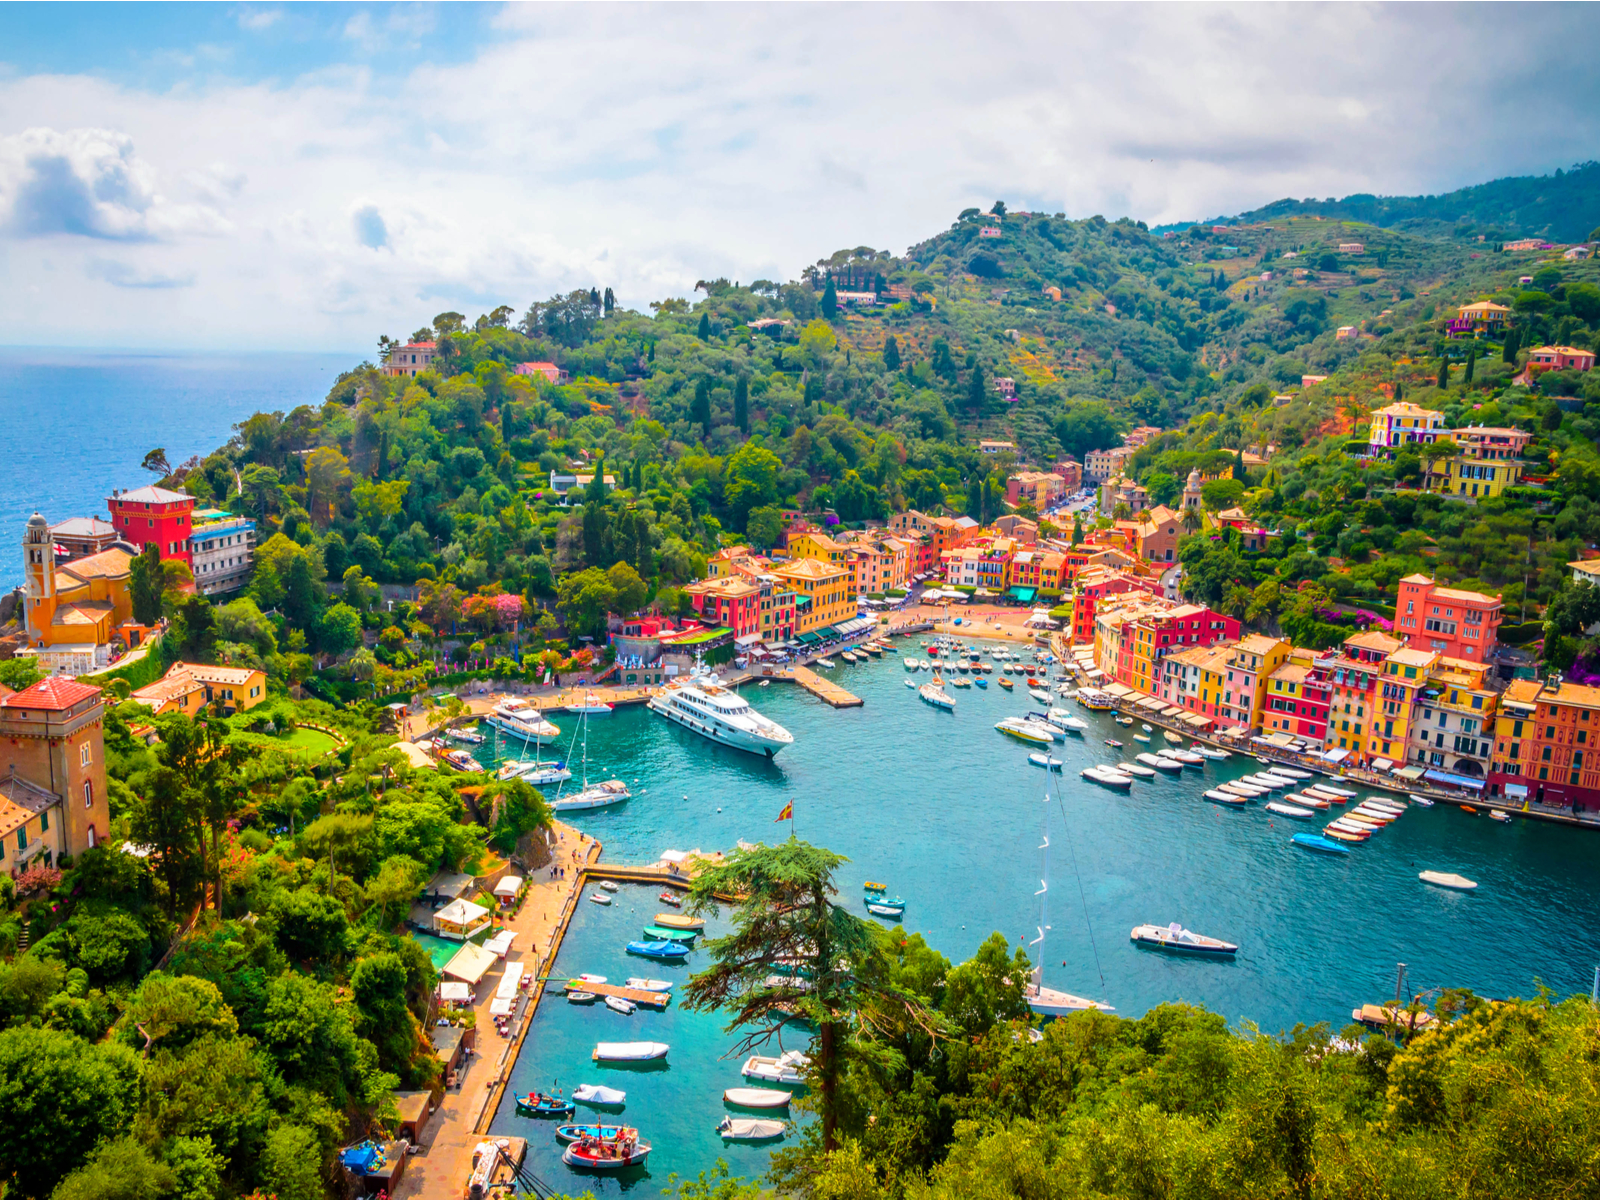 Aerial view of boats and homes in Portofino, one of the best places to visit in Italy